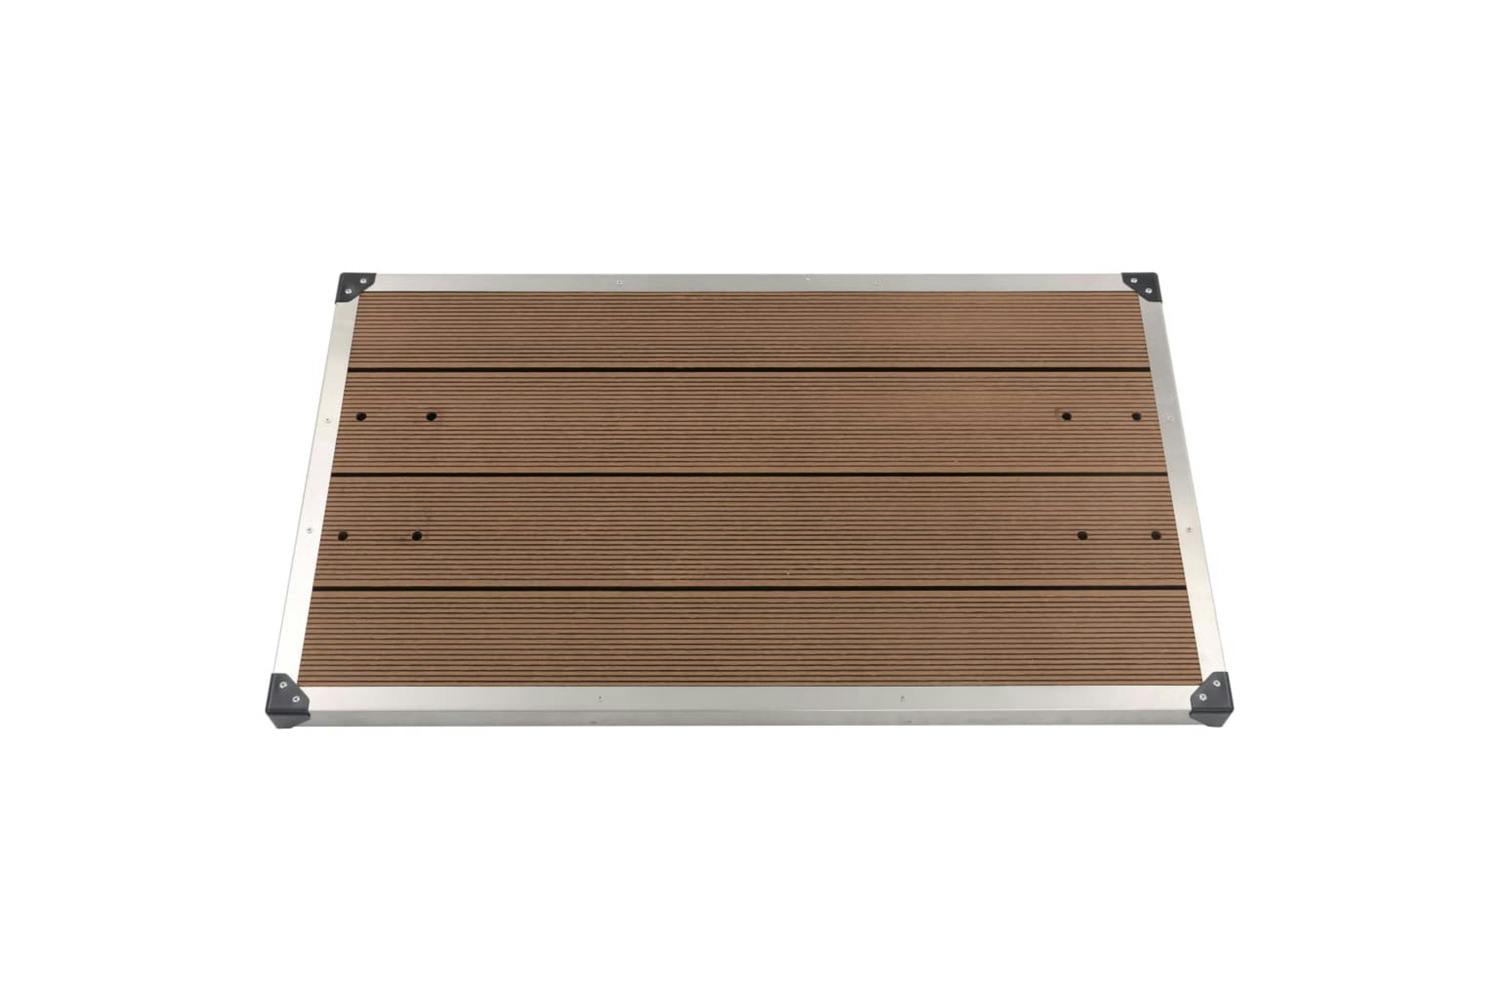 Vidaxl 48204 Outdoor Shower Tray Wpc Stainless Steel 110x62 Cm Brown